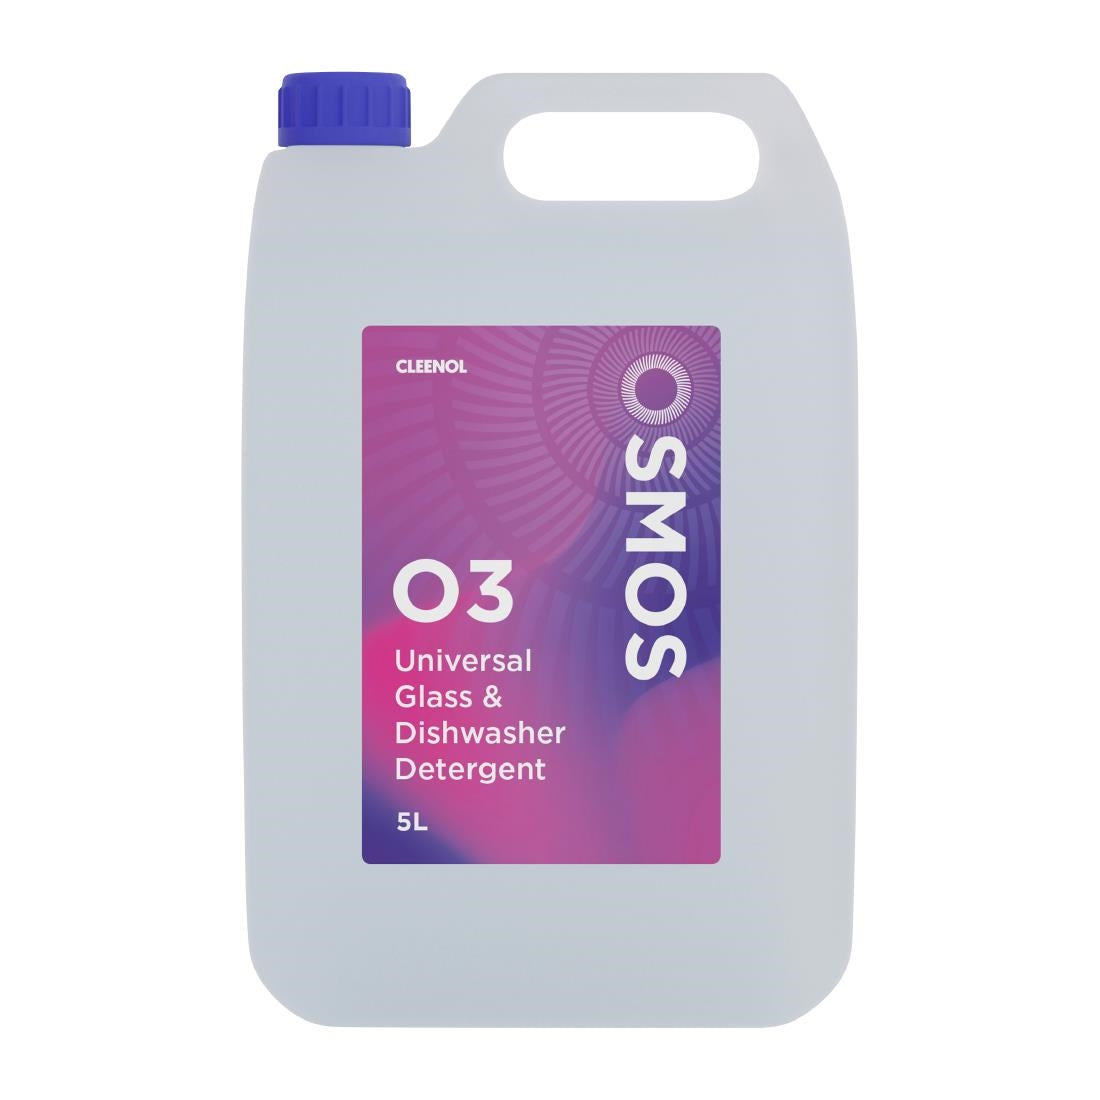 CU596 OSMOS Universal Glass and Dishwasher Detergent (2x5Ltr) JD Catering Equipment Solutions Ltd